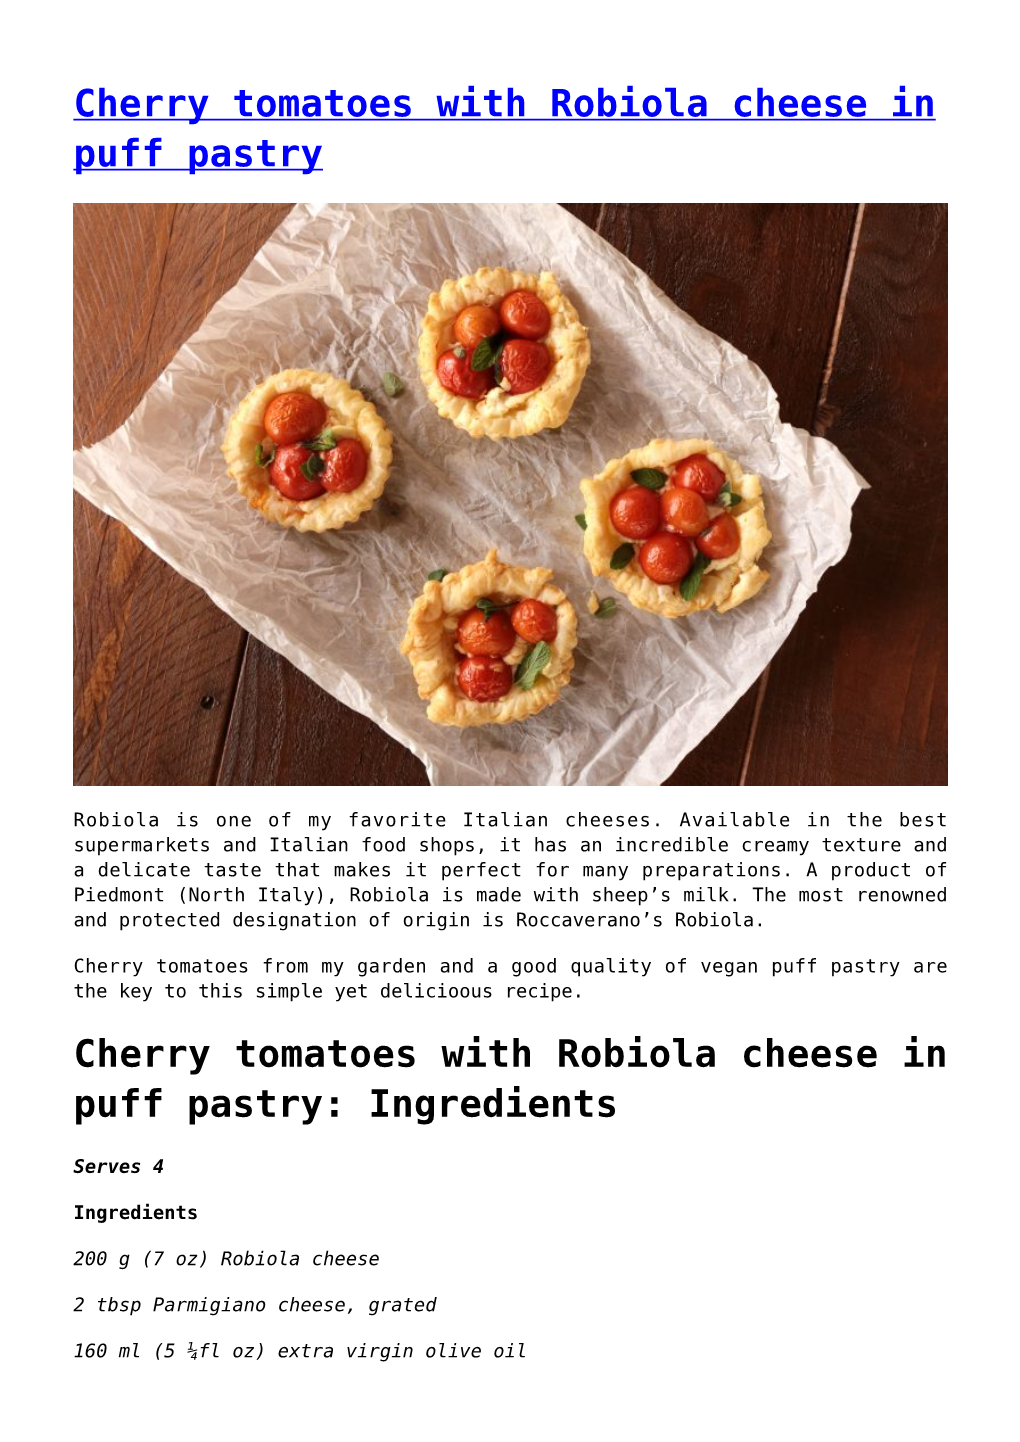 Cherry Tomatoes with Robiola Cheese in Puff Pastry